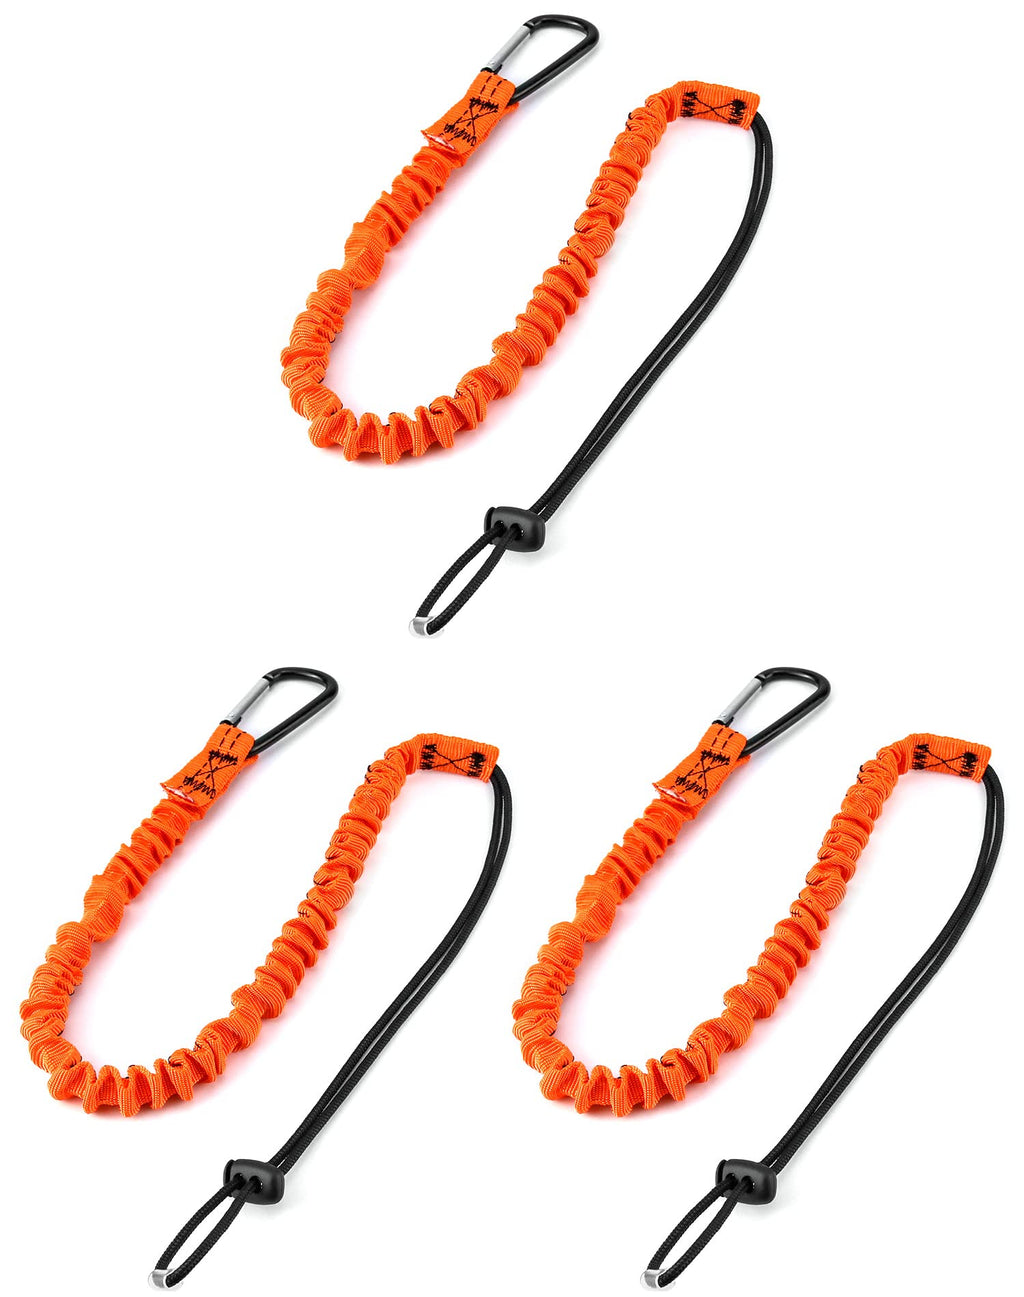  [AUSTRALIA] - QWORK Tool Lanyard, 3 Pack Safety Lanyard Retractable Bungee Cord with Standard Spring Carabiner and Adjustable Loop End